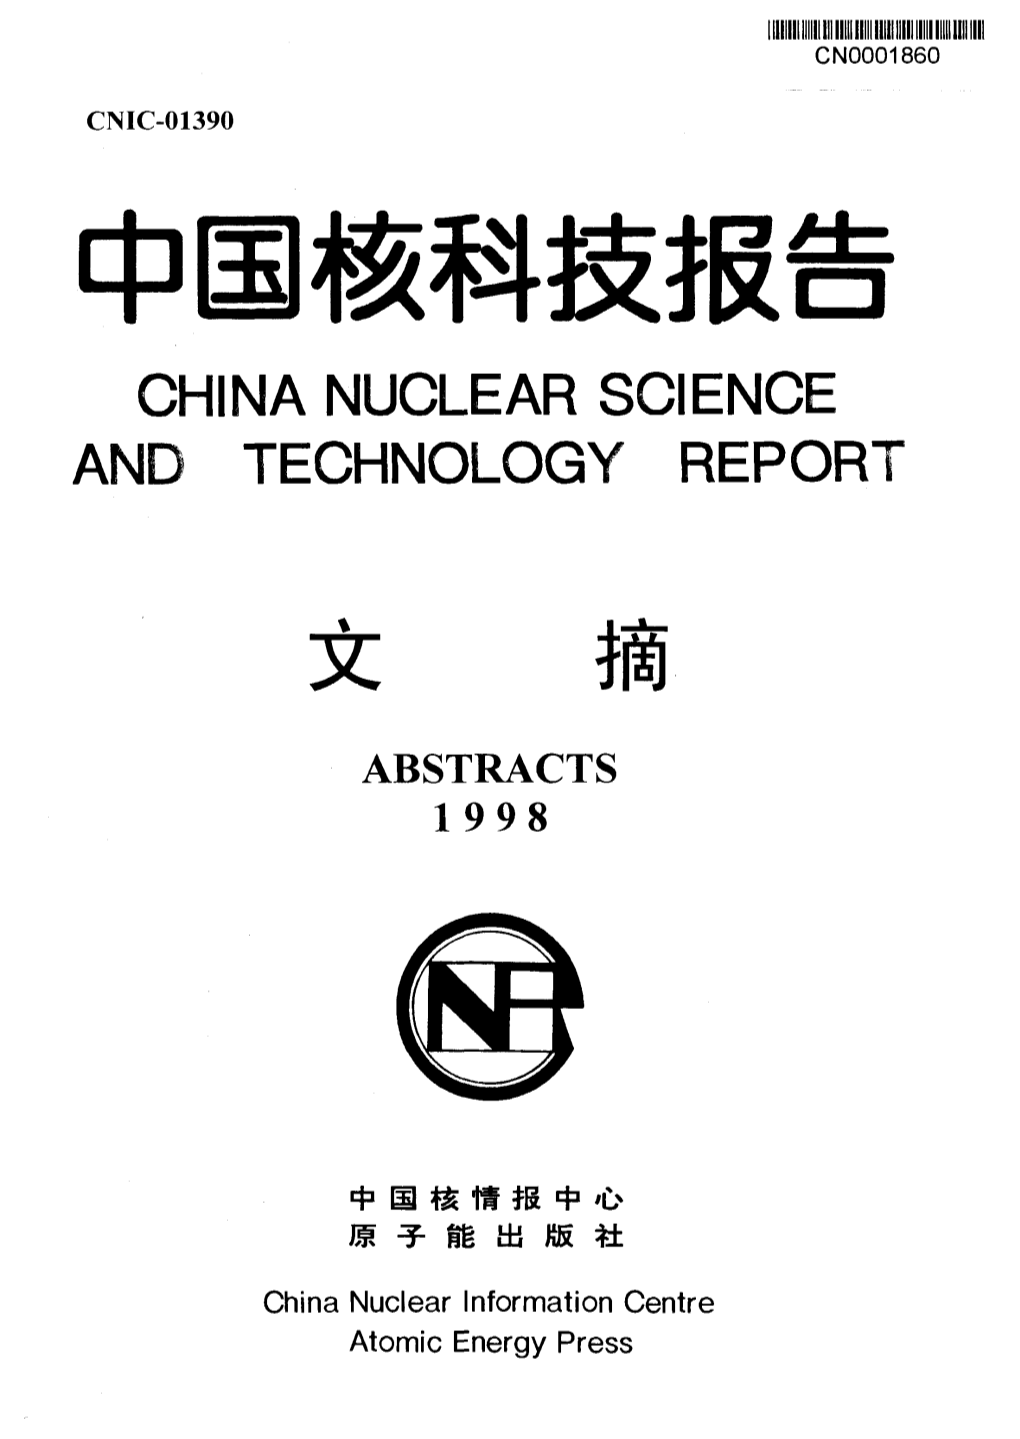 CHINA NUCLEAR SCIENCE and TECHNOLOGY REPORT M ABSTRACTS 1998